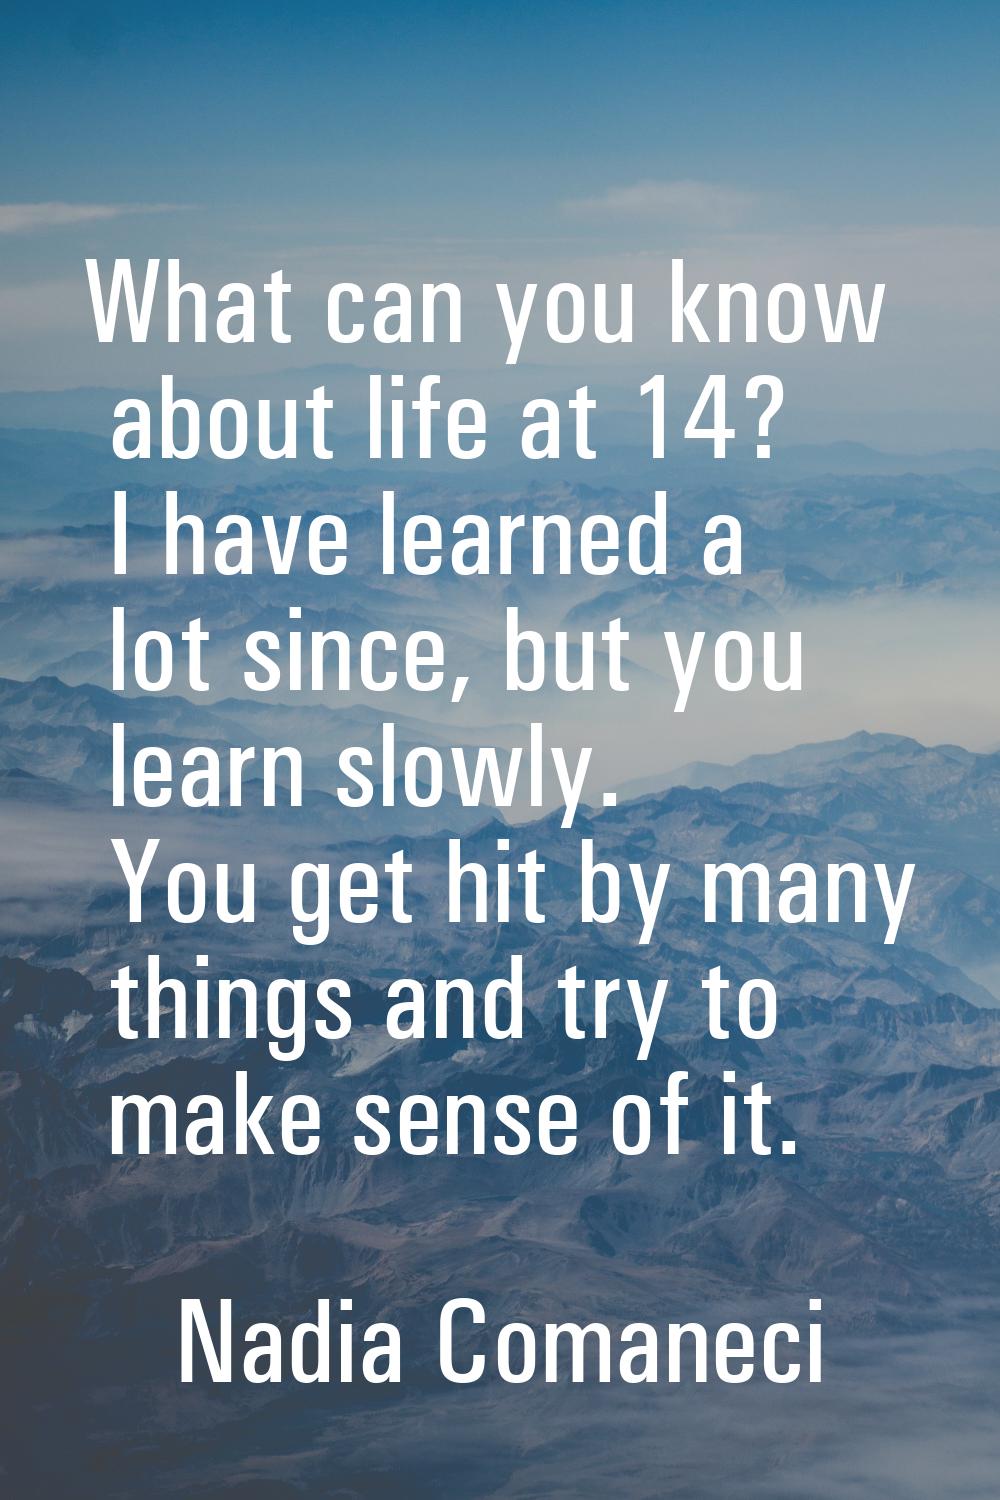 What can you know about life at 14? I have learned a lot since, but you learn slowly. You get hit b